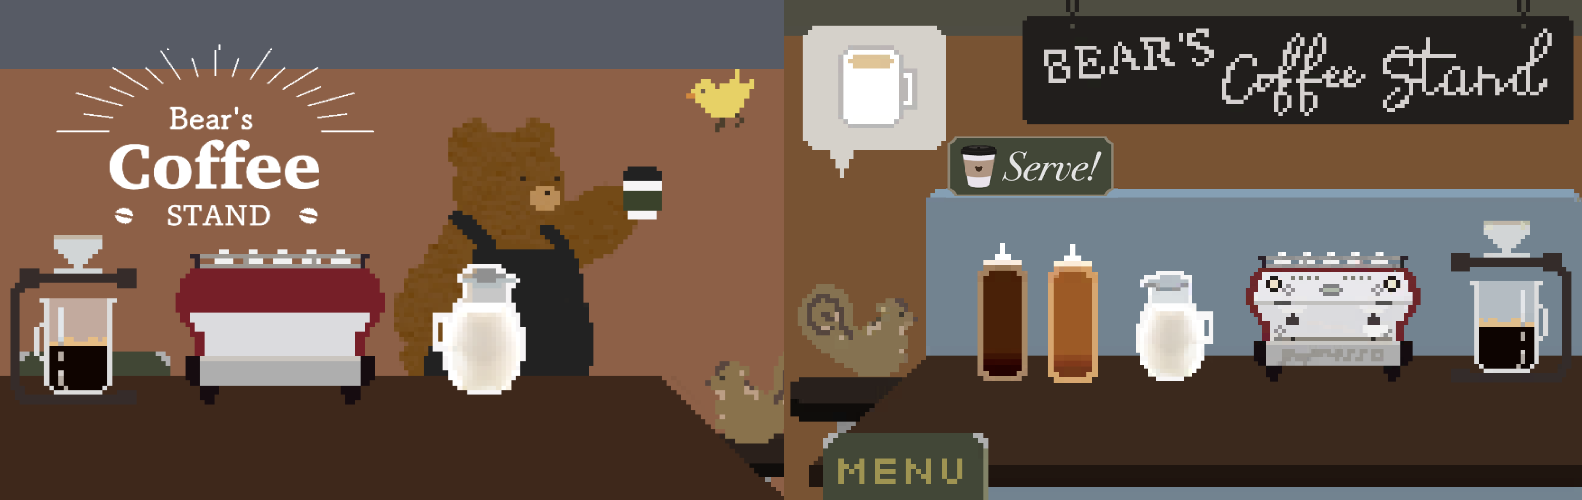 Bear's Coffee Stand Banner